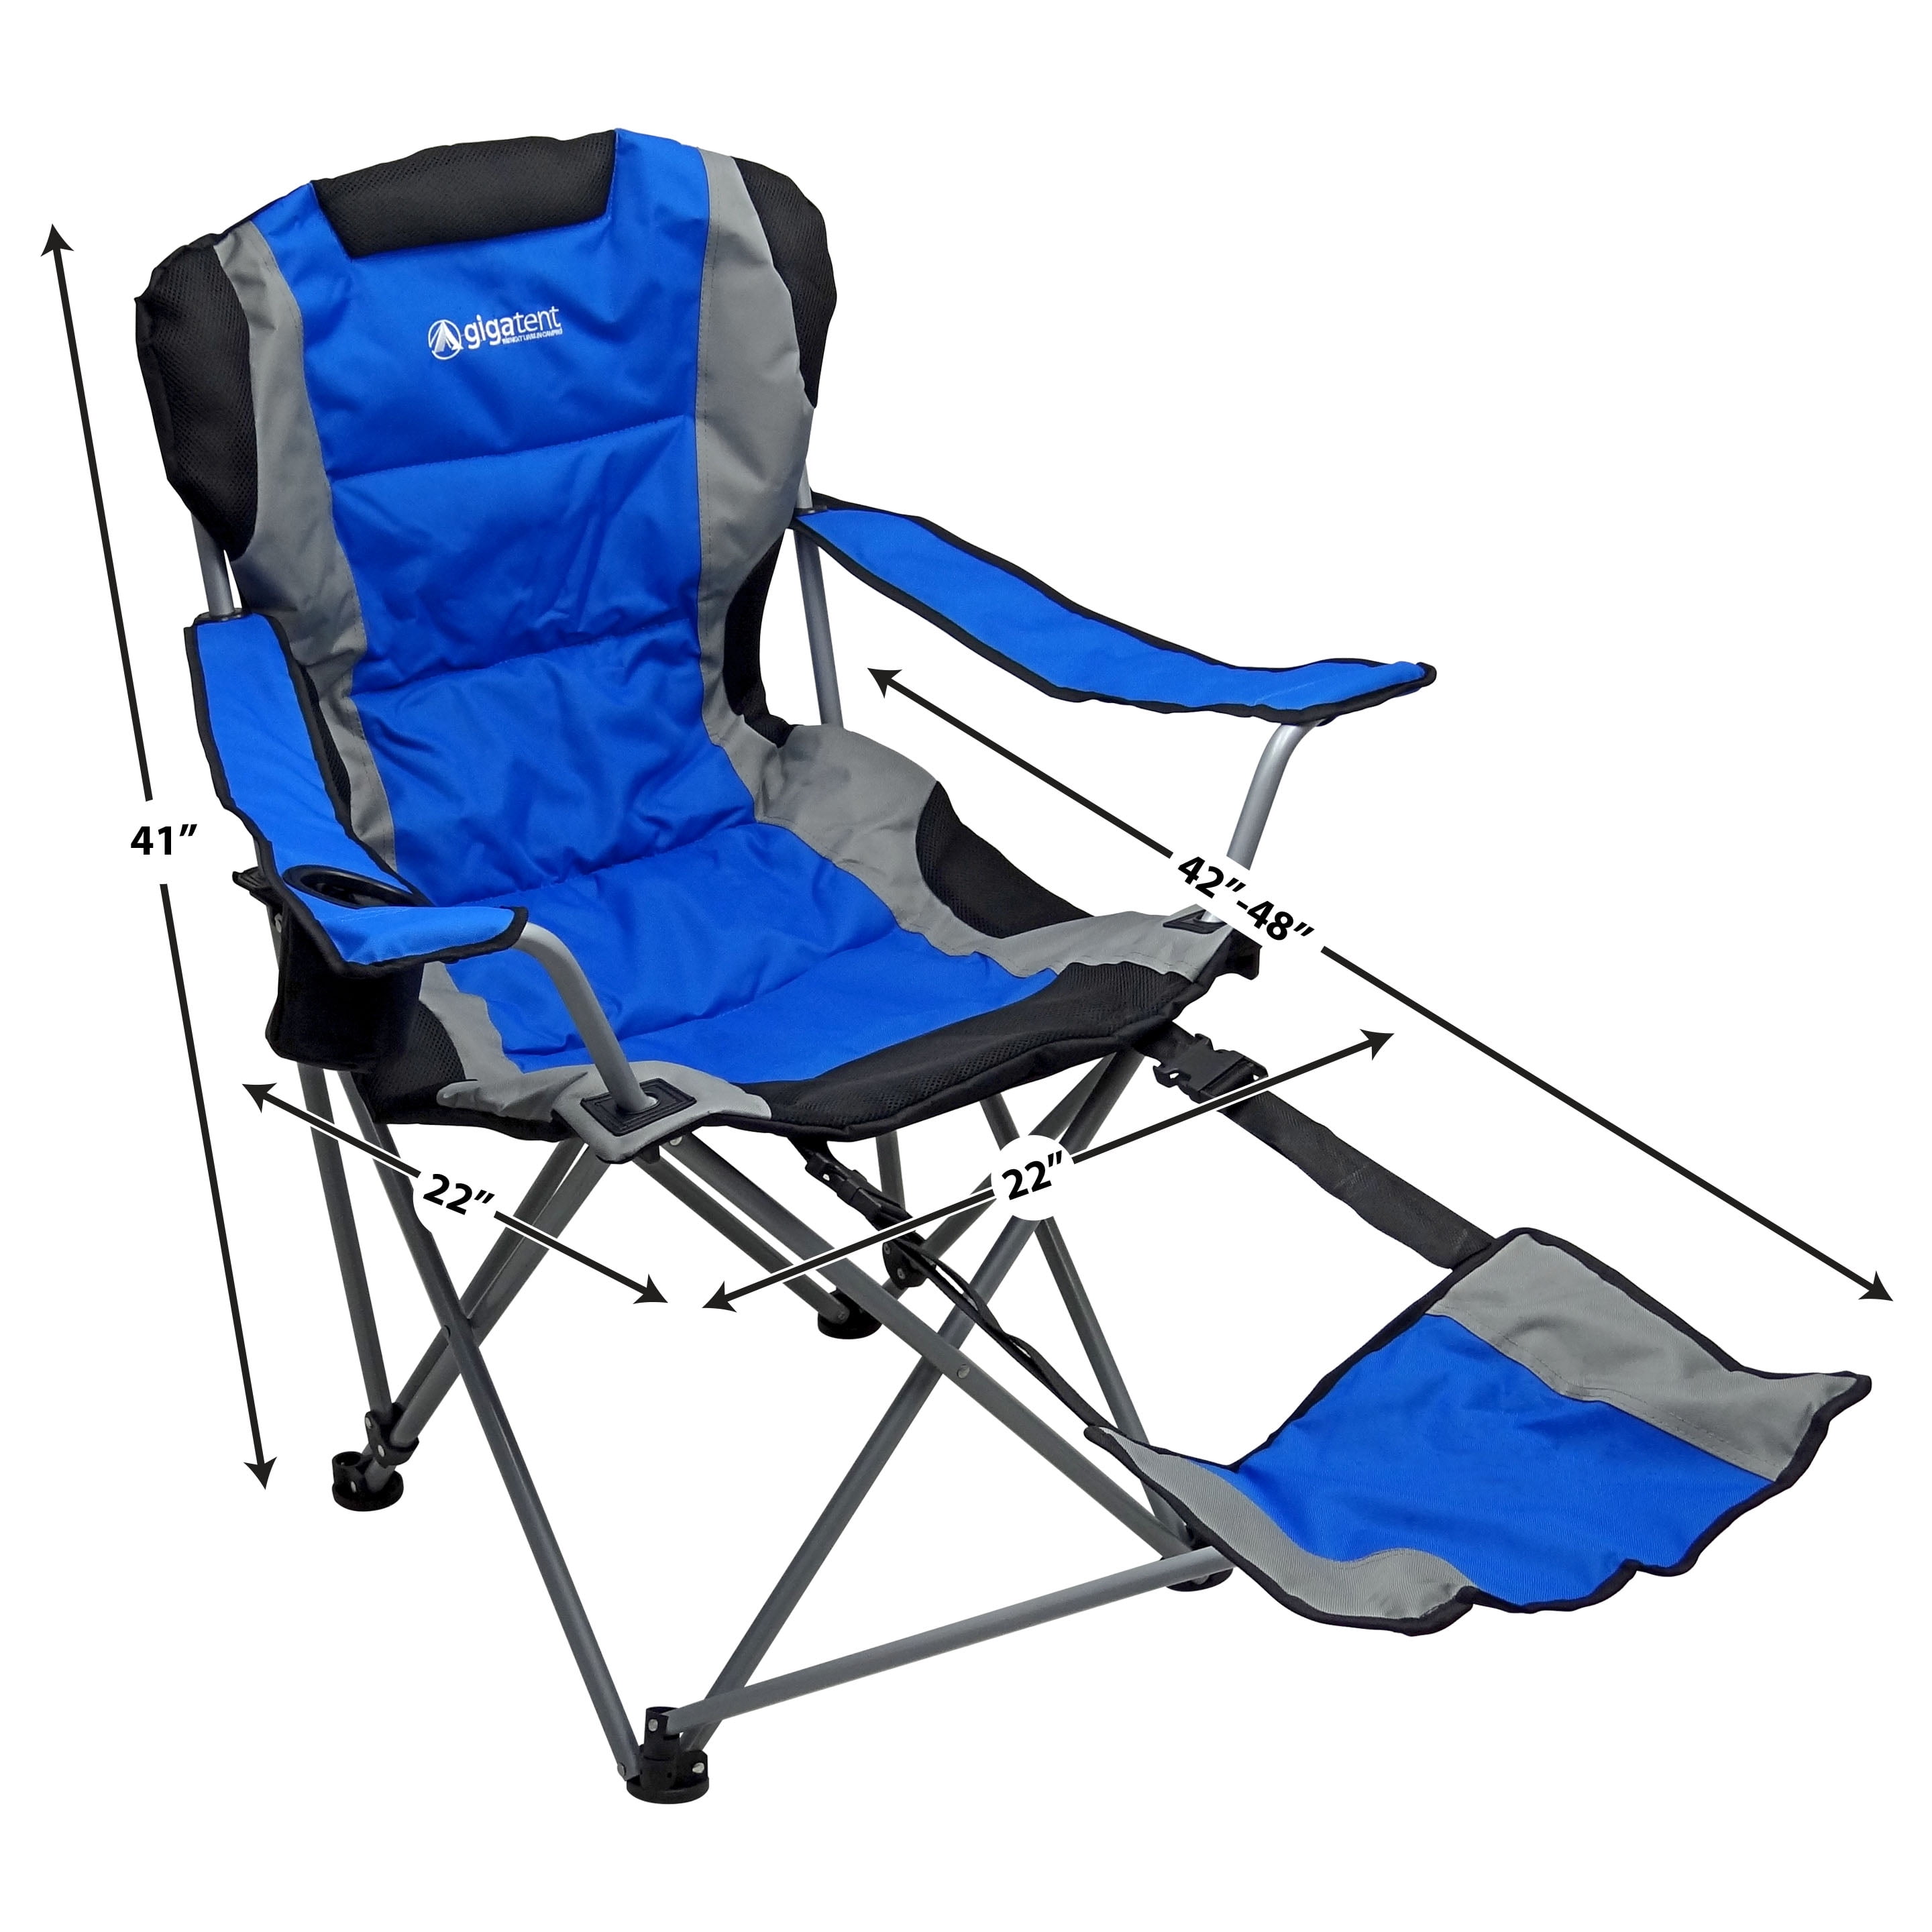 GigaTent Folding Camping Chair with 